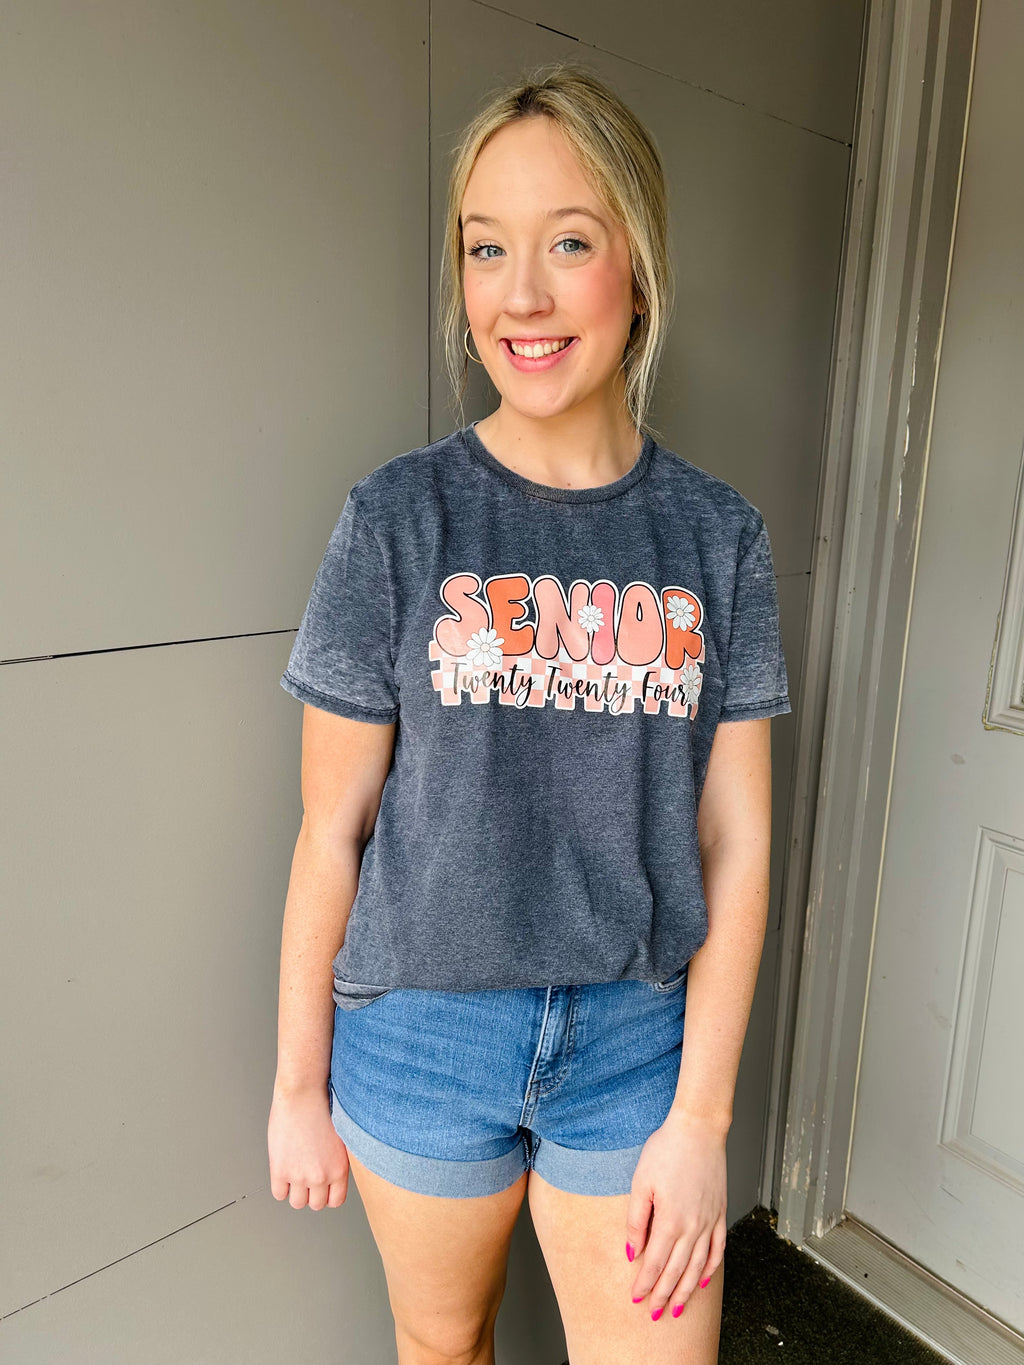 Lookin' for that perfect gift for the seniors graduating in '24? This Retro Senior '24 Graphic Tee is just that – the perfect mix of retro and fresh! With its cute bubble font, short sleeves and unisex fit, they'll be stylin' from the day they accept their diploma! Congrats, seniors!